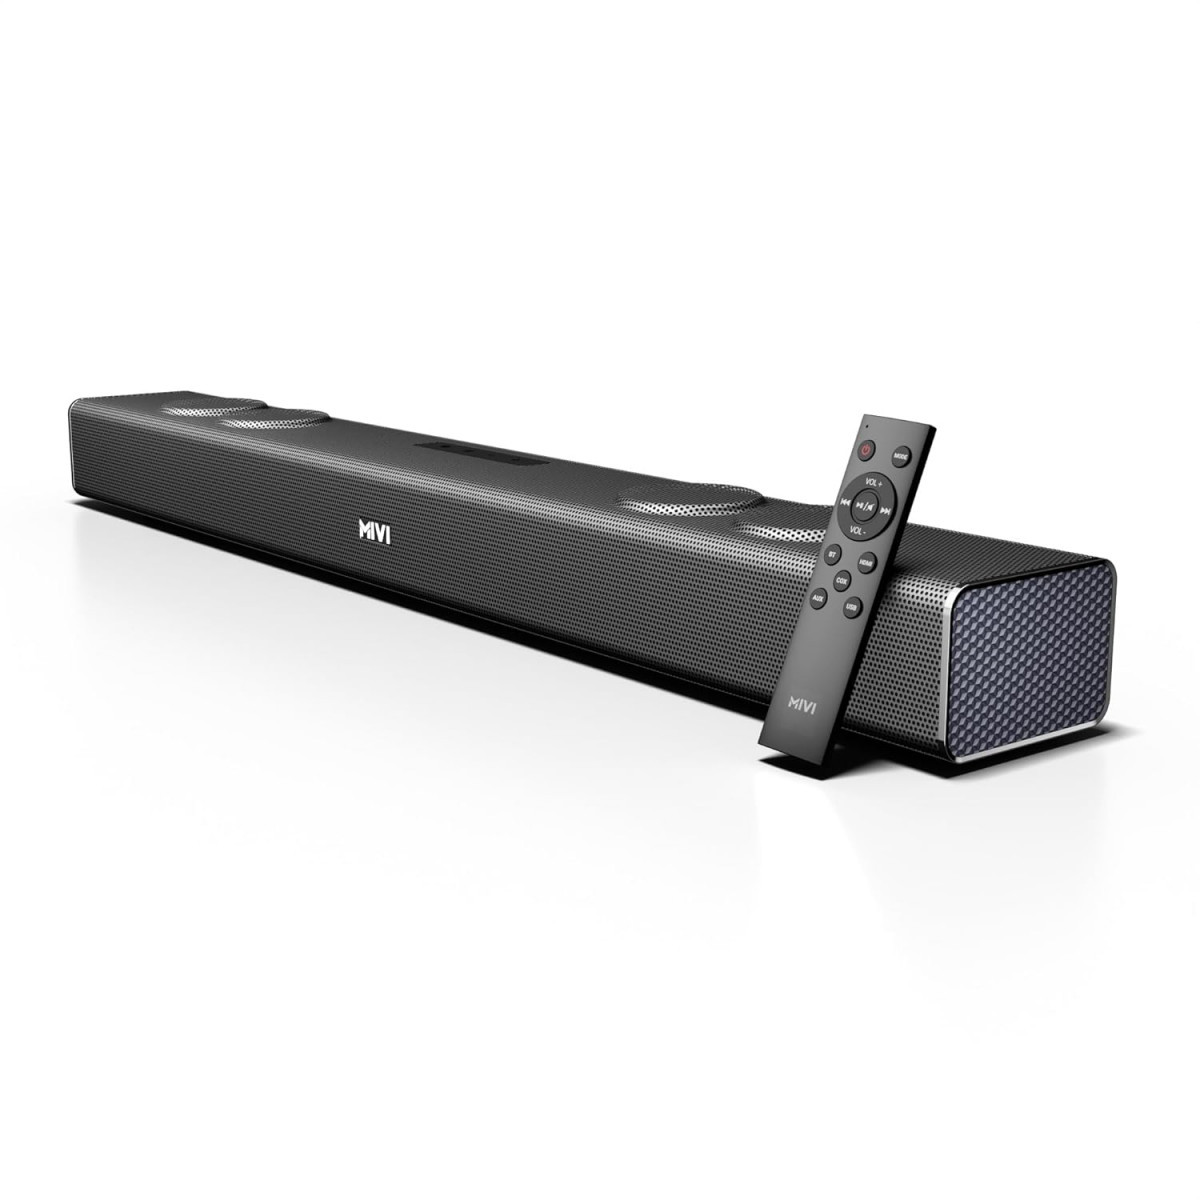 Mivi Fort Q120 Soundbar with 120W Surround Sound 22 Channel soundbar with 2 in-Built subwoofers Multiple EQ and Input Modes Remote Accessibility Bluetooth v51 Made in India Sound bar for TV